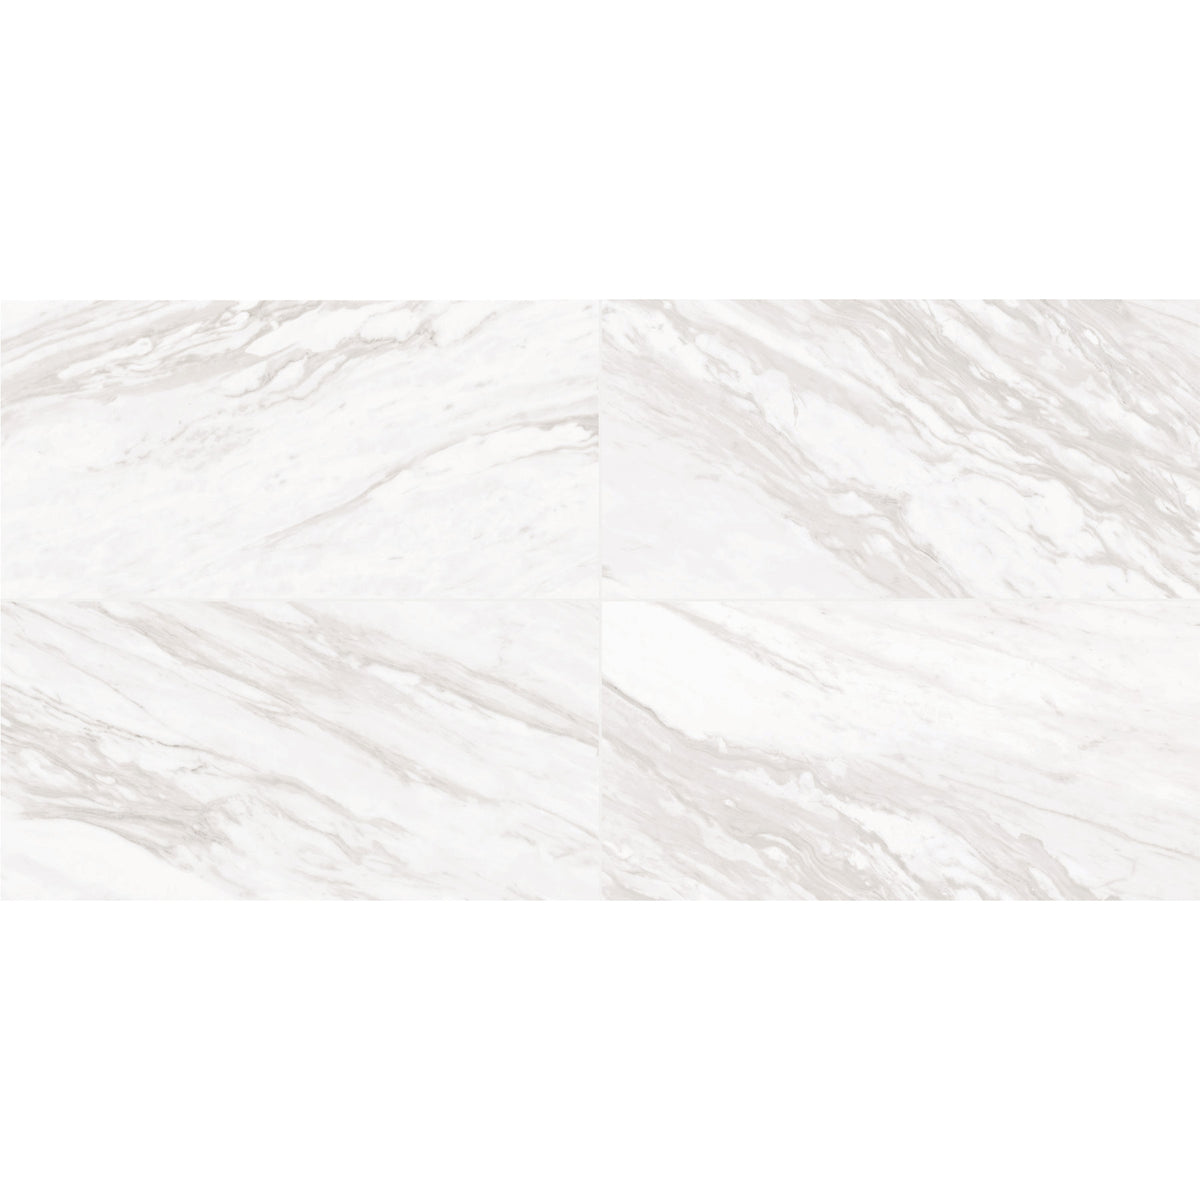 Daltile - Perpetuo - 12 in. x 24 in. Glazed Ceramic Wall Tile - Timeless White Variation